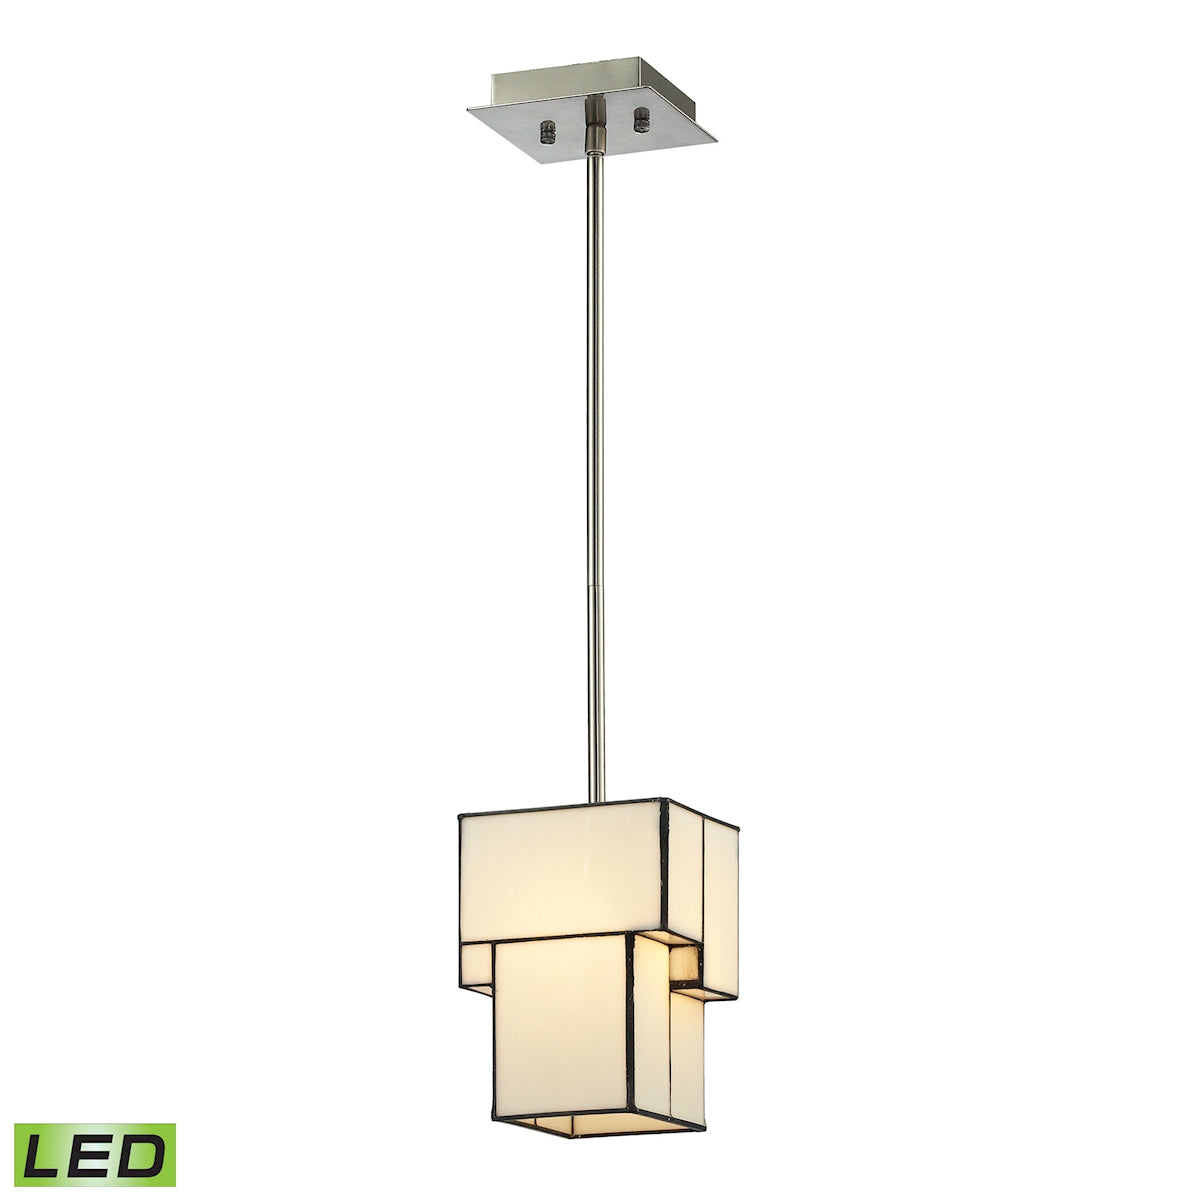 ELK Lighting 72062-1-LED Cubist 1-Light Mini Pendant in Brushed Nickel with White Tiffany Glass - Includes LED Bulb